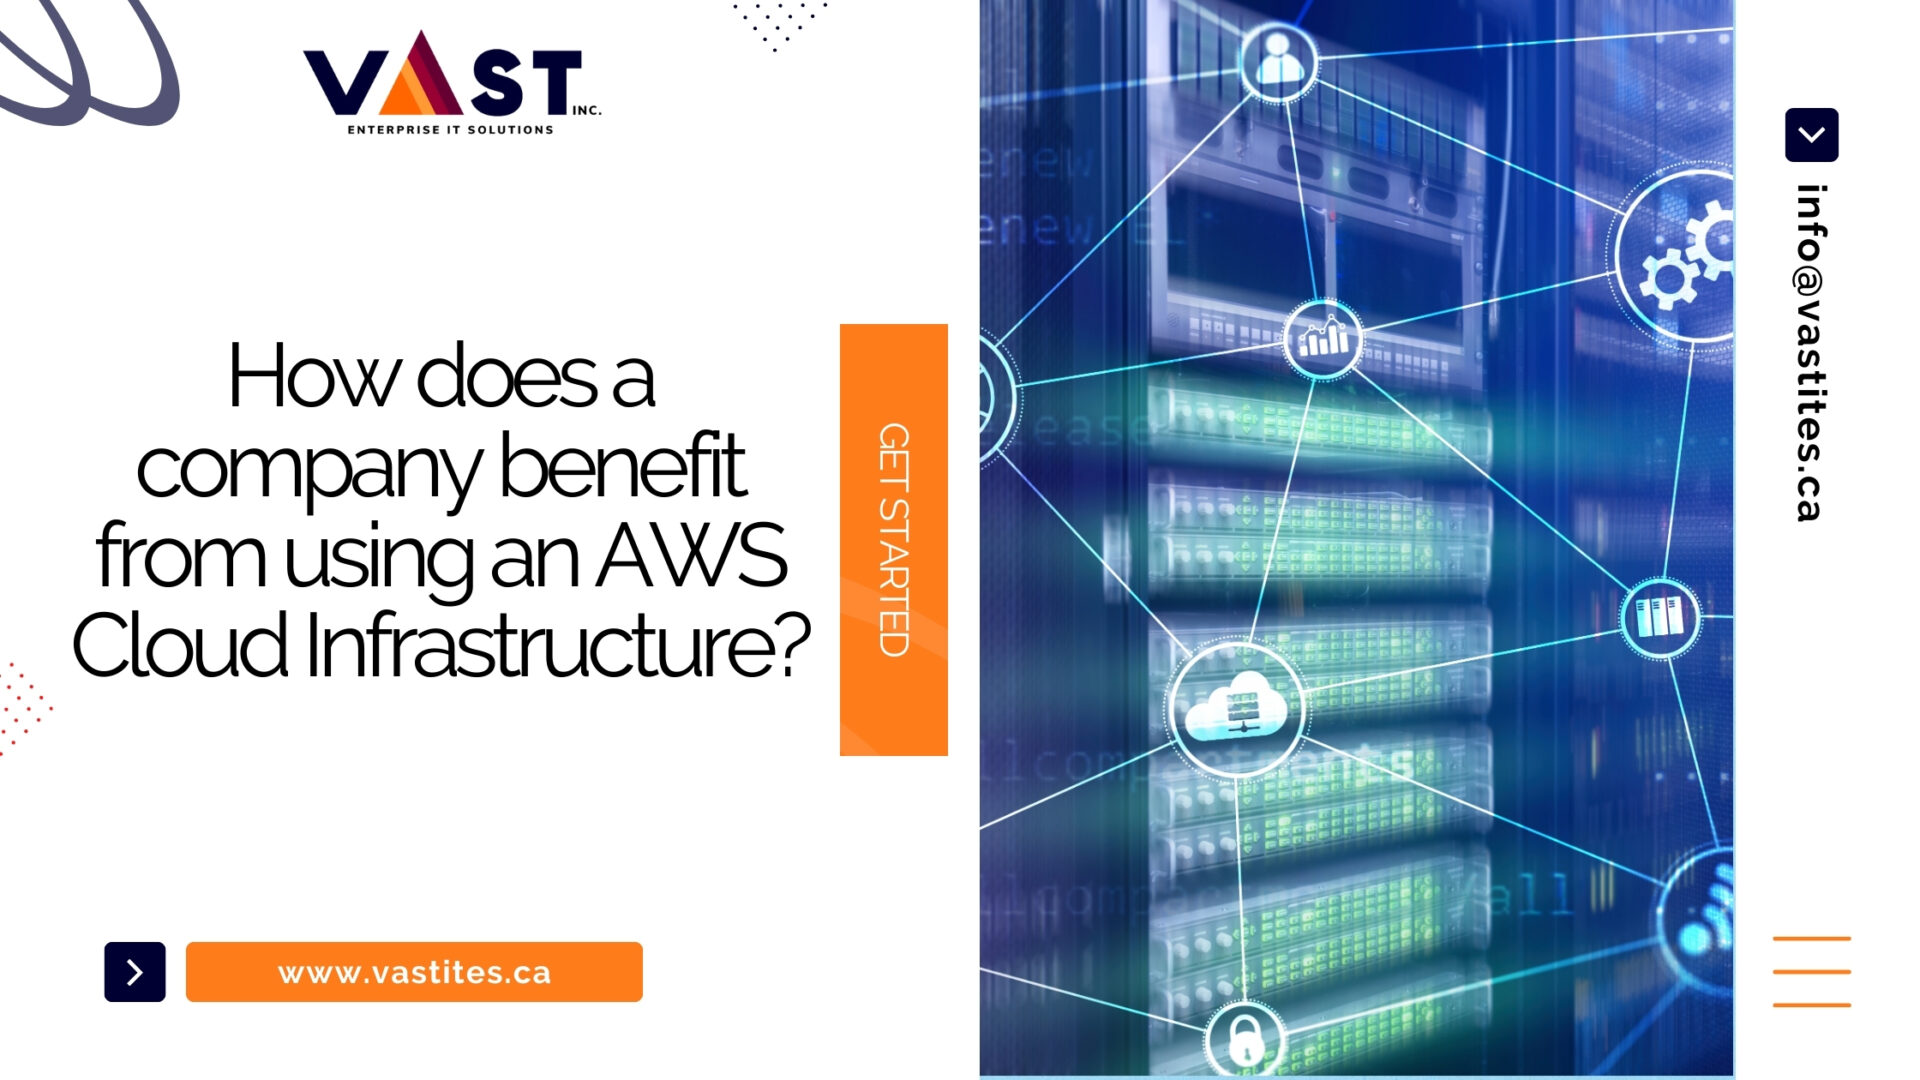 How-does-a-company-benefit-from-using-an-AWS-Cloud-Infrastructure-1.jpg